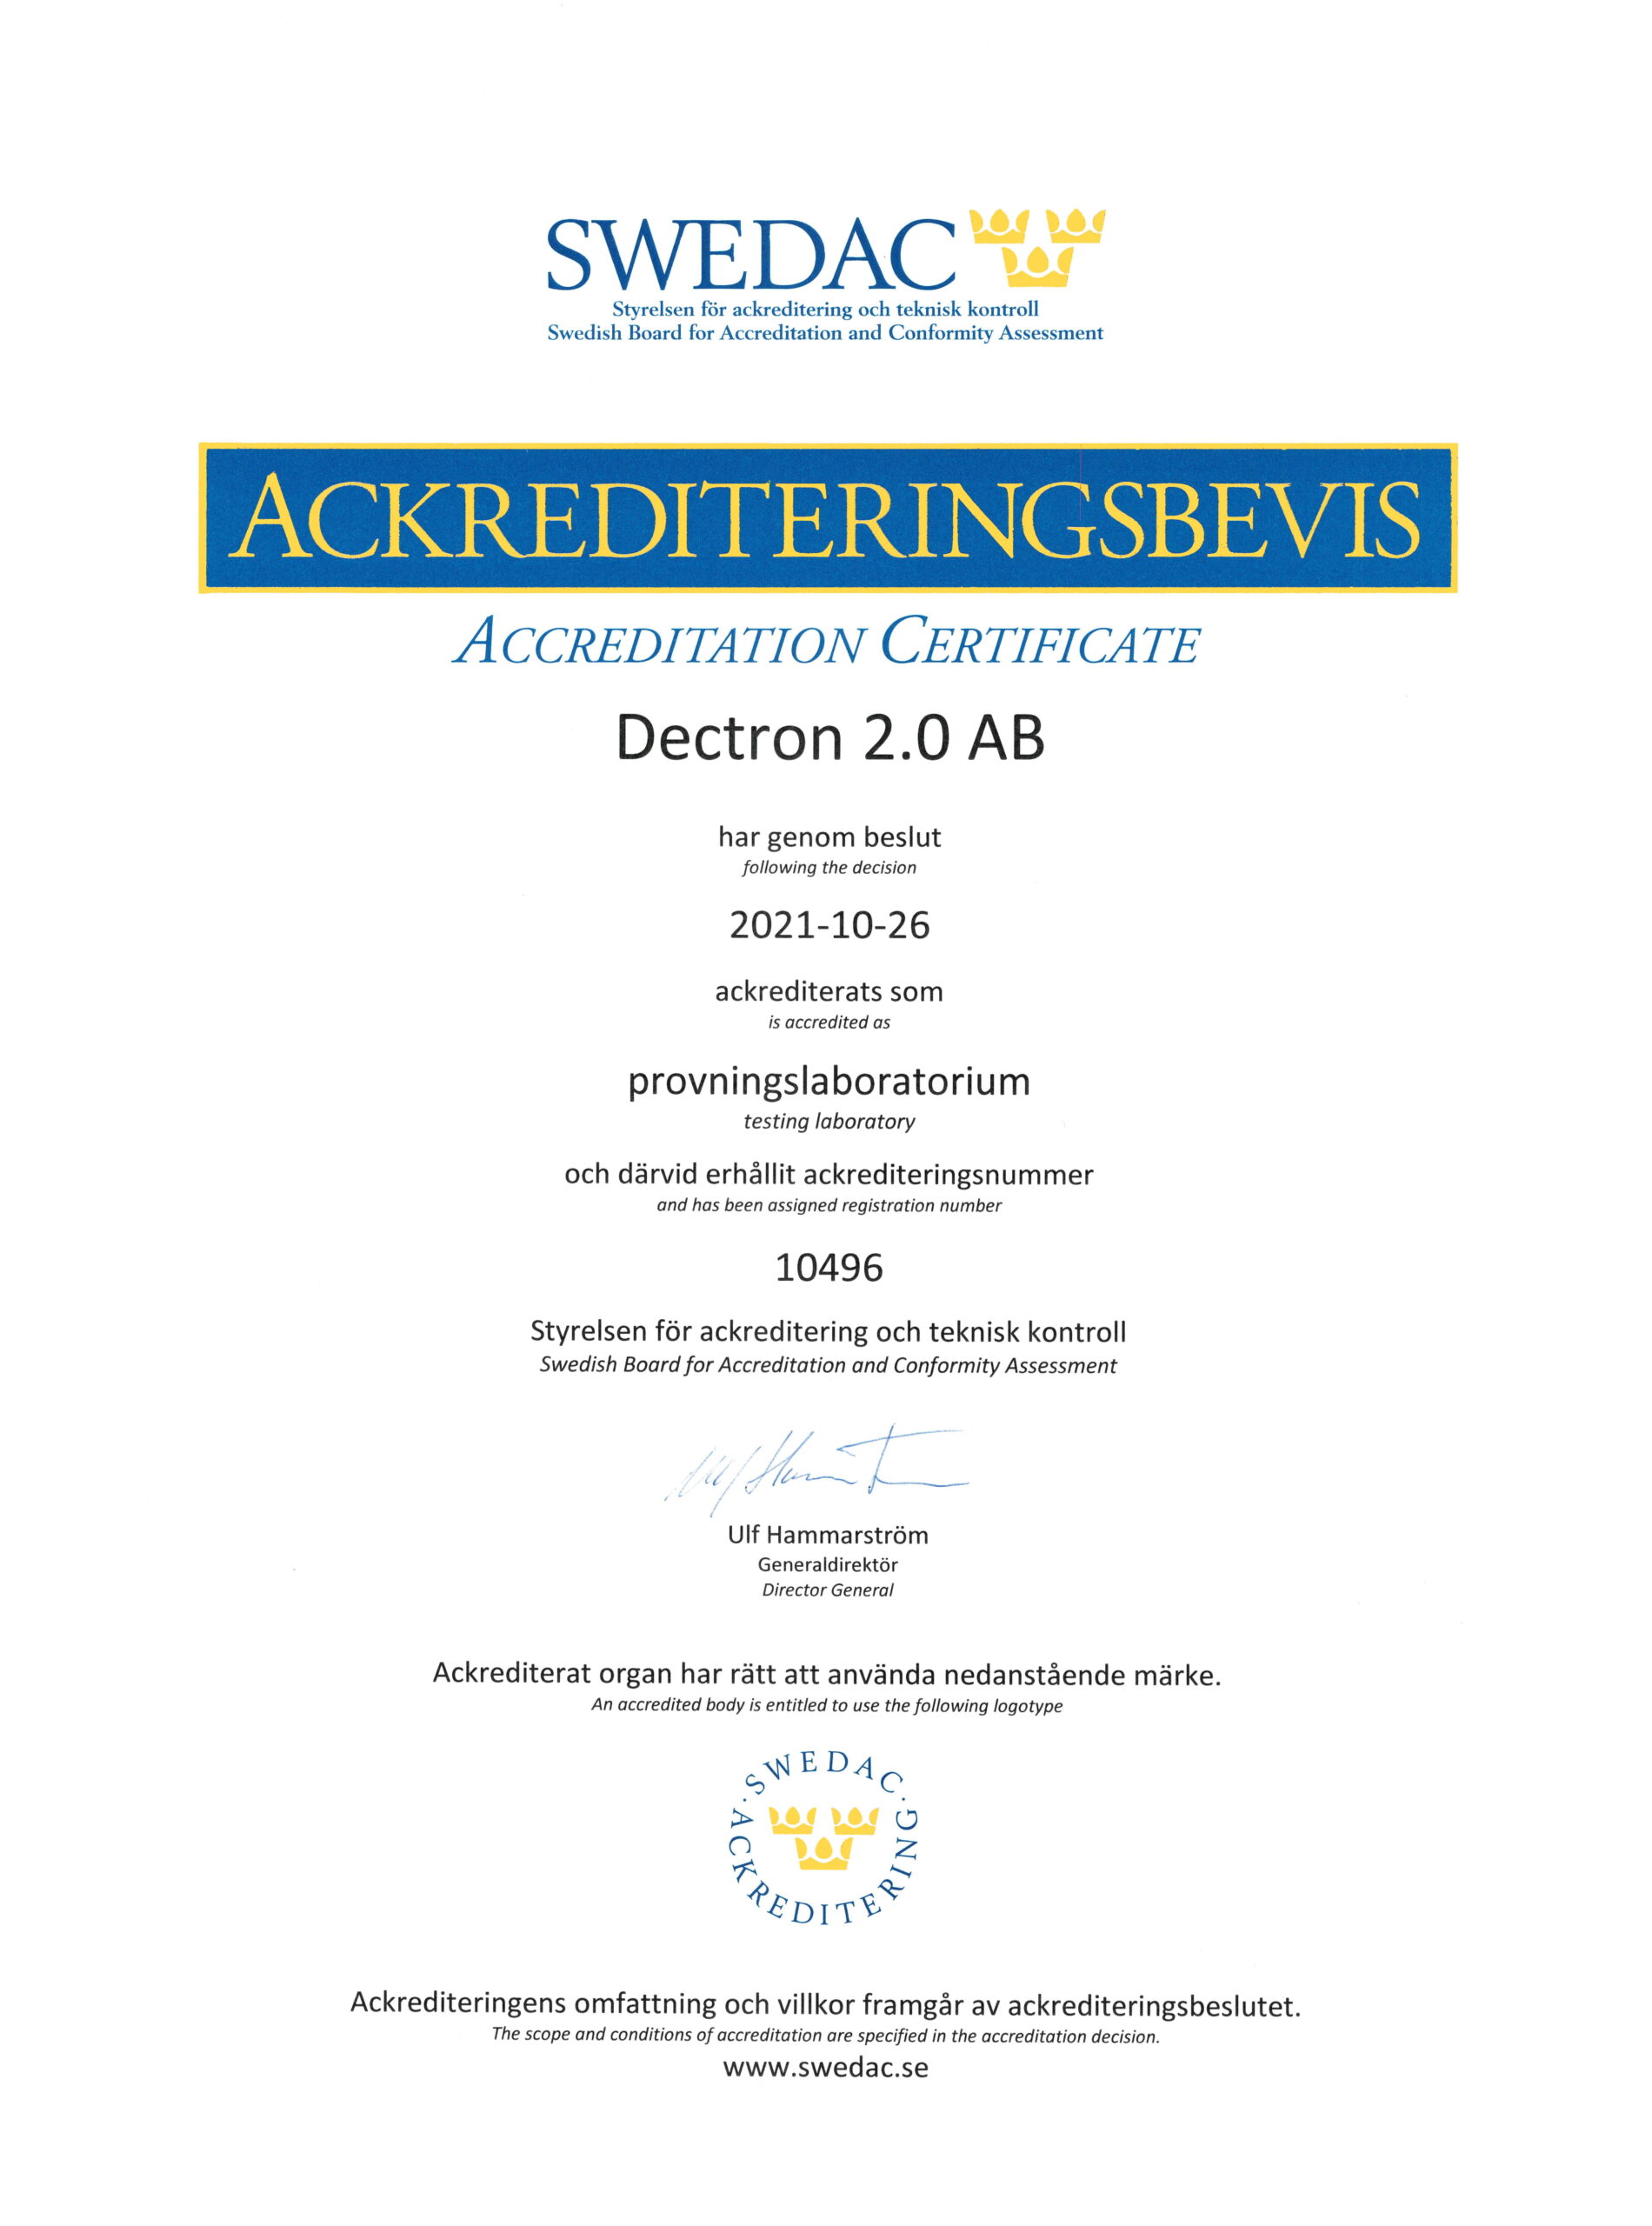 Accreditation Certificate Dectron